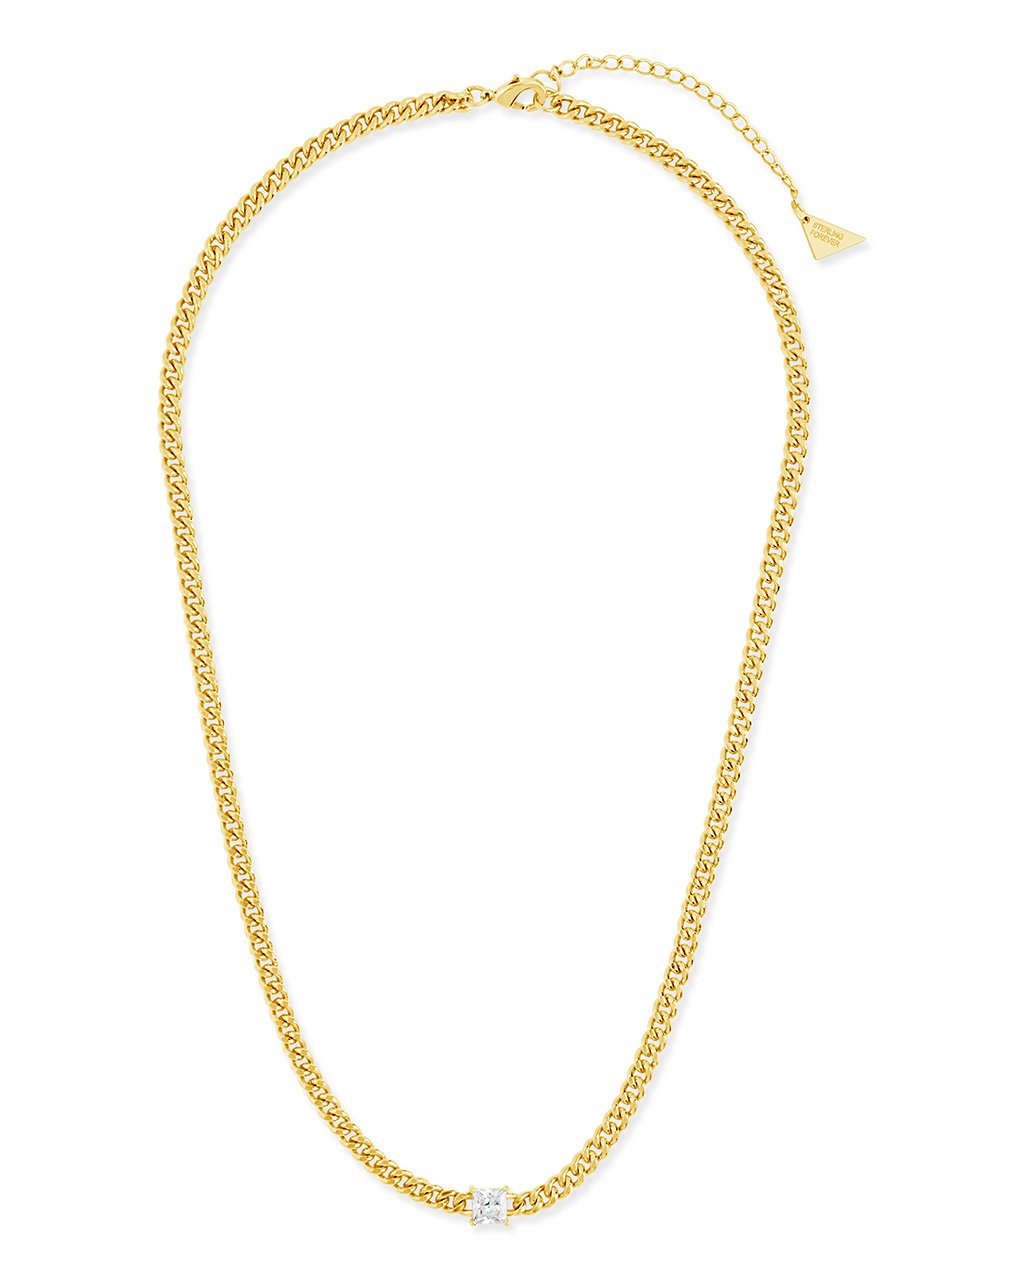 CURB CHAIN NECKLACE IN STERLING SILVER — CHARLOTTE CAUWE STUDIO